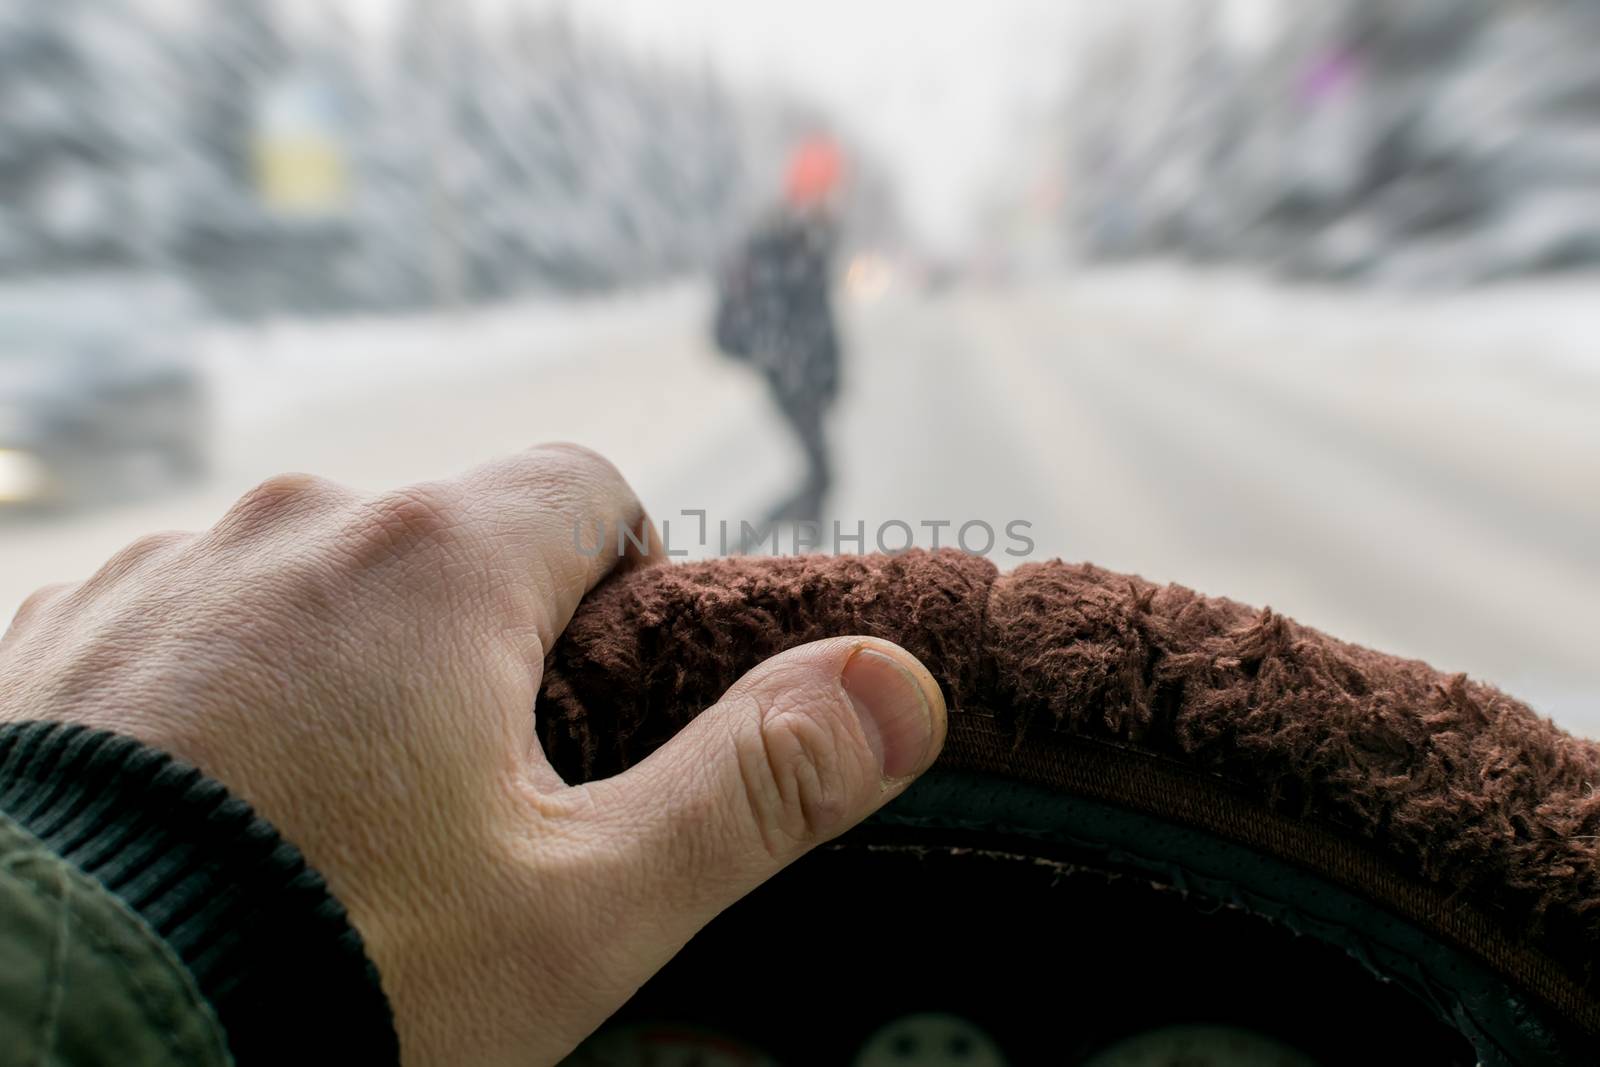 Emergency. A man's hand on the steering wheel of a car while braking against the background of a pedestrian suddenly appearing